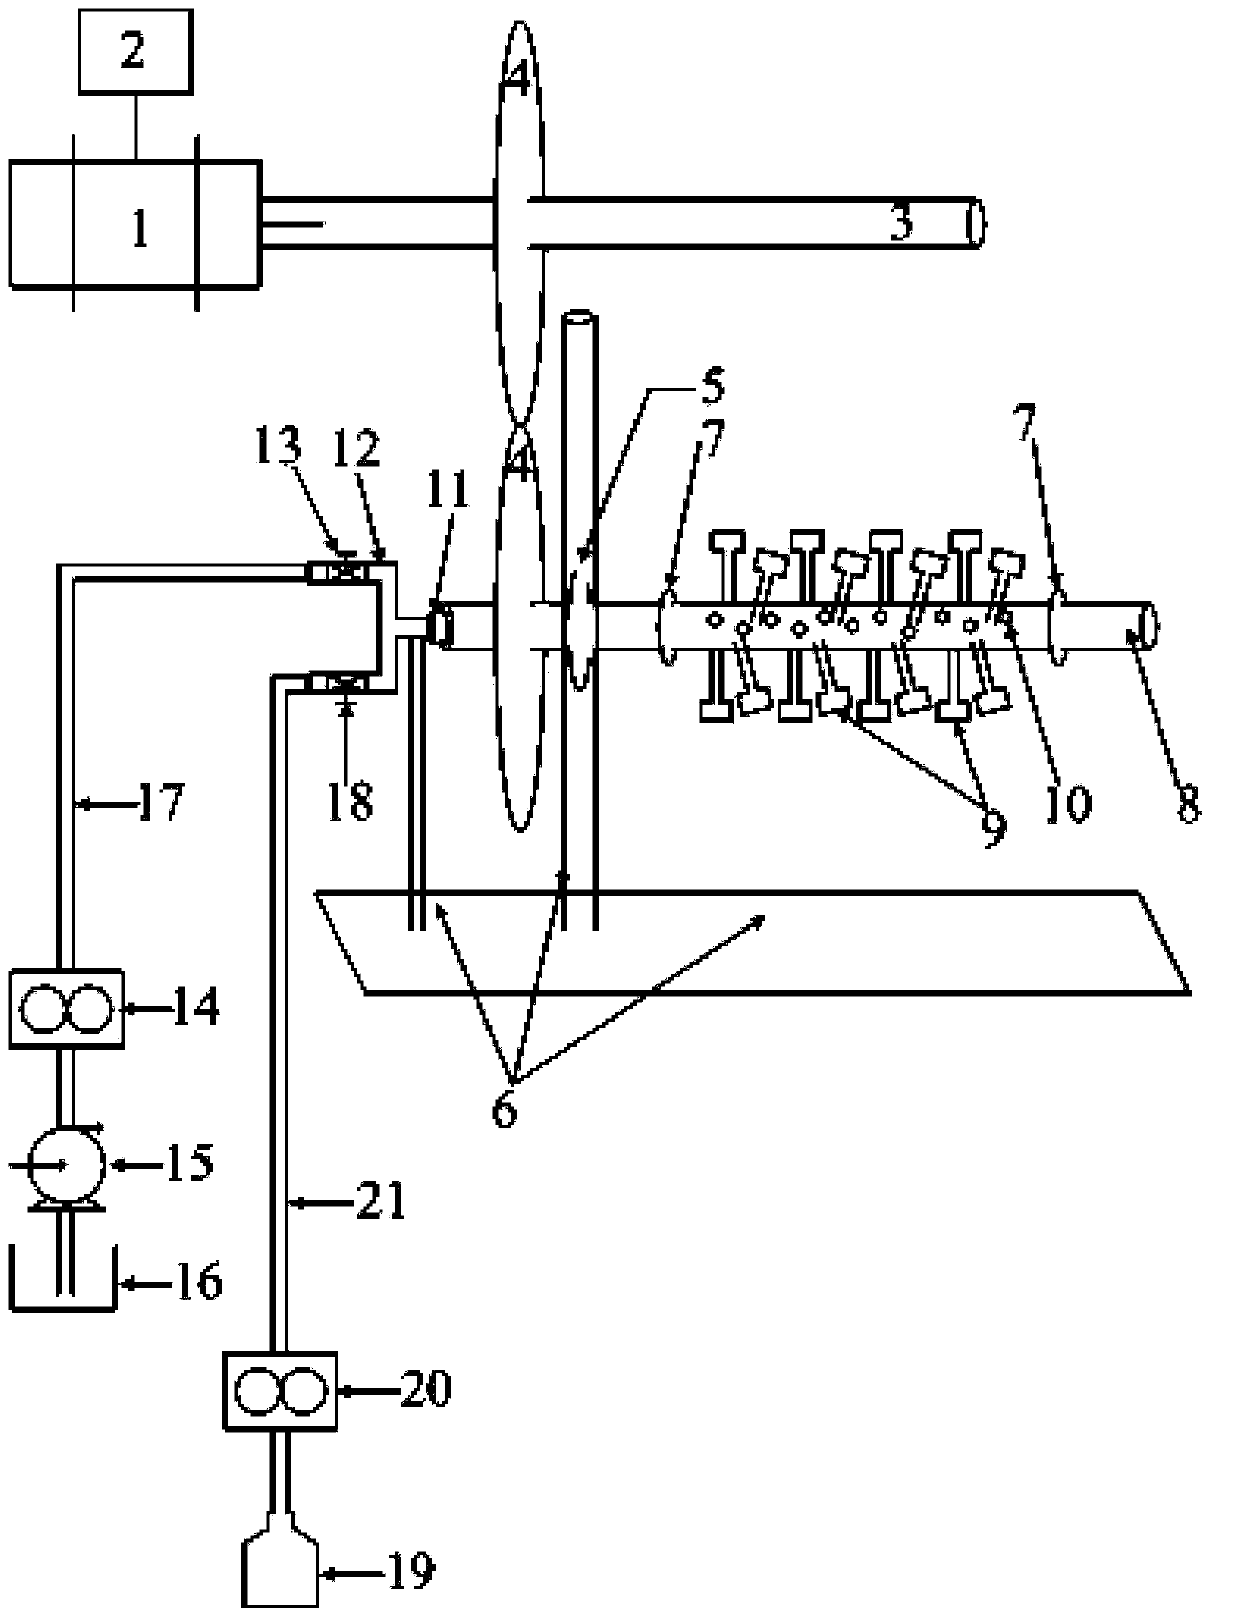 Simulation test apparatus for persulfate hot-steam activated advanced oxidation ex-situ restoration of contaminated soil and simulation test method thereof